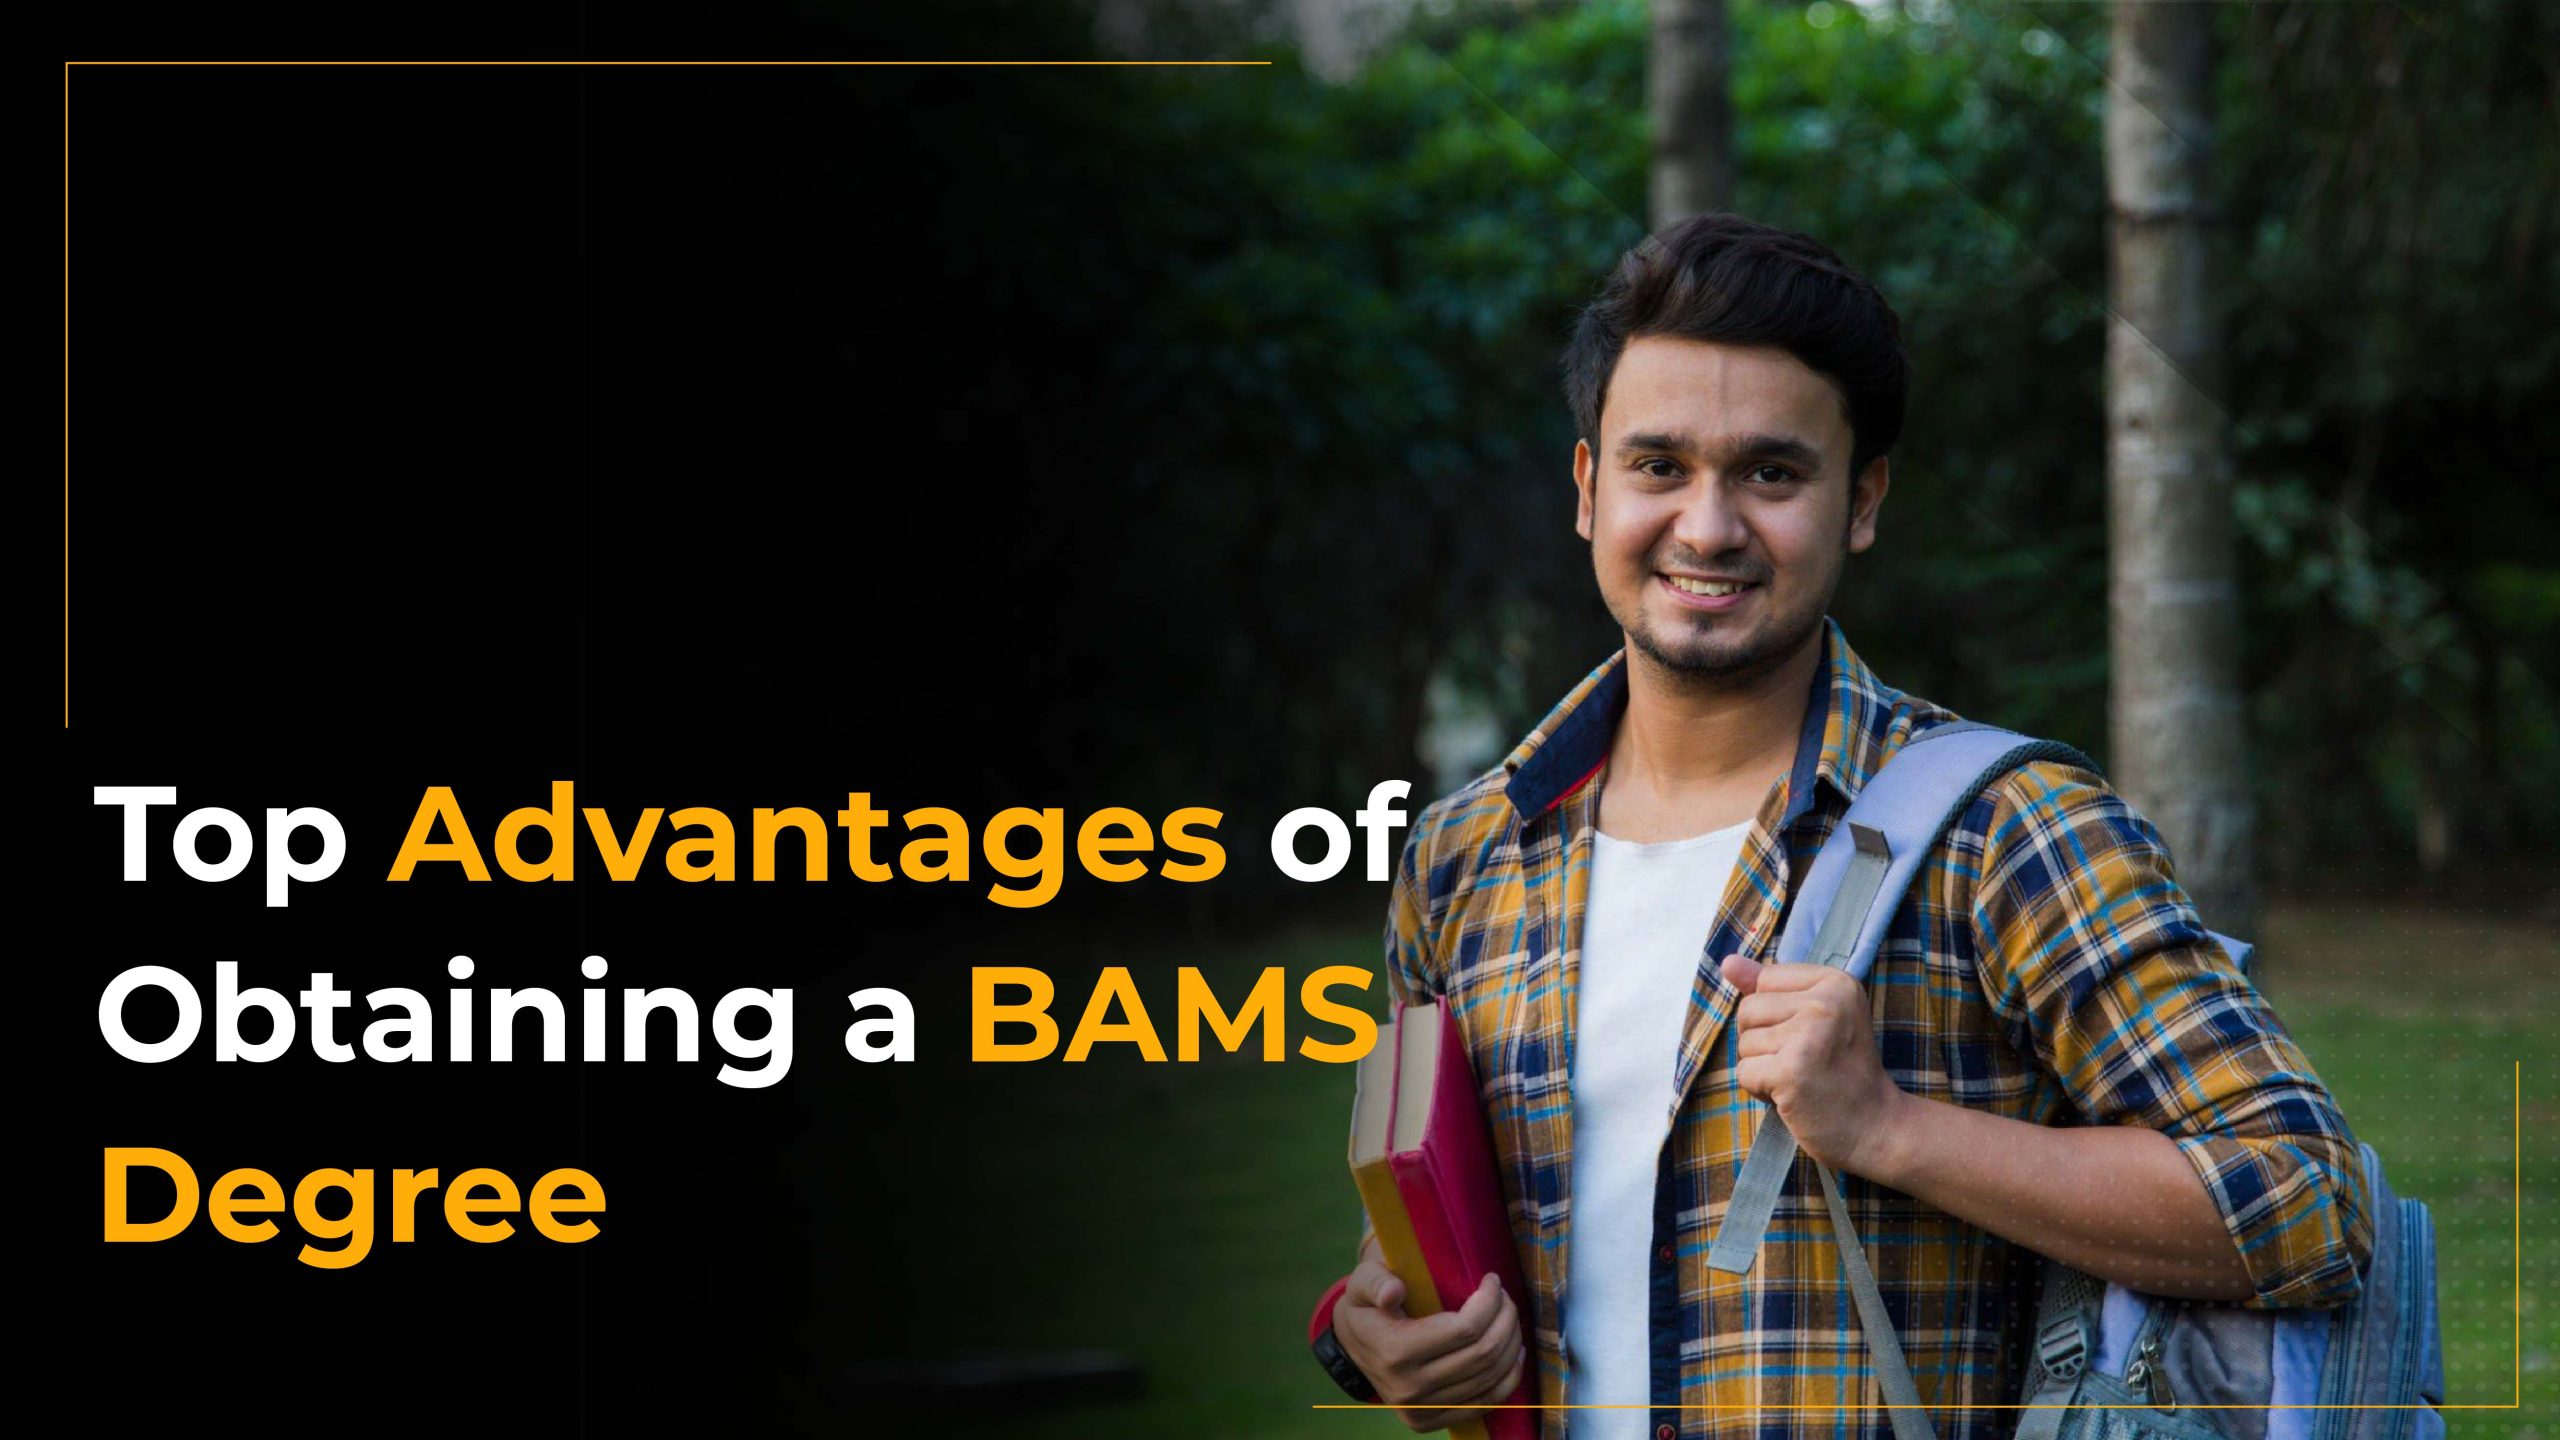 Top Advantages of Obtaining a BAMS Degree